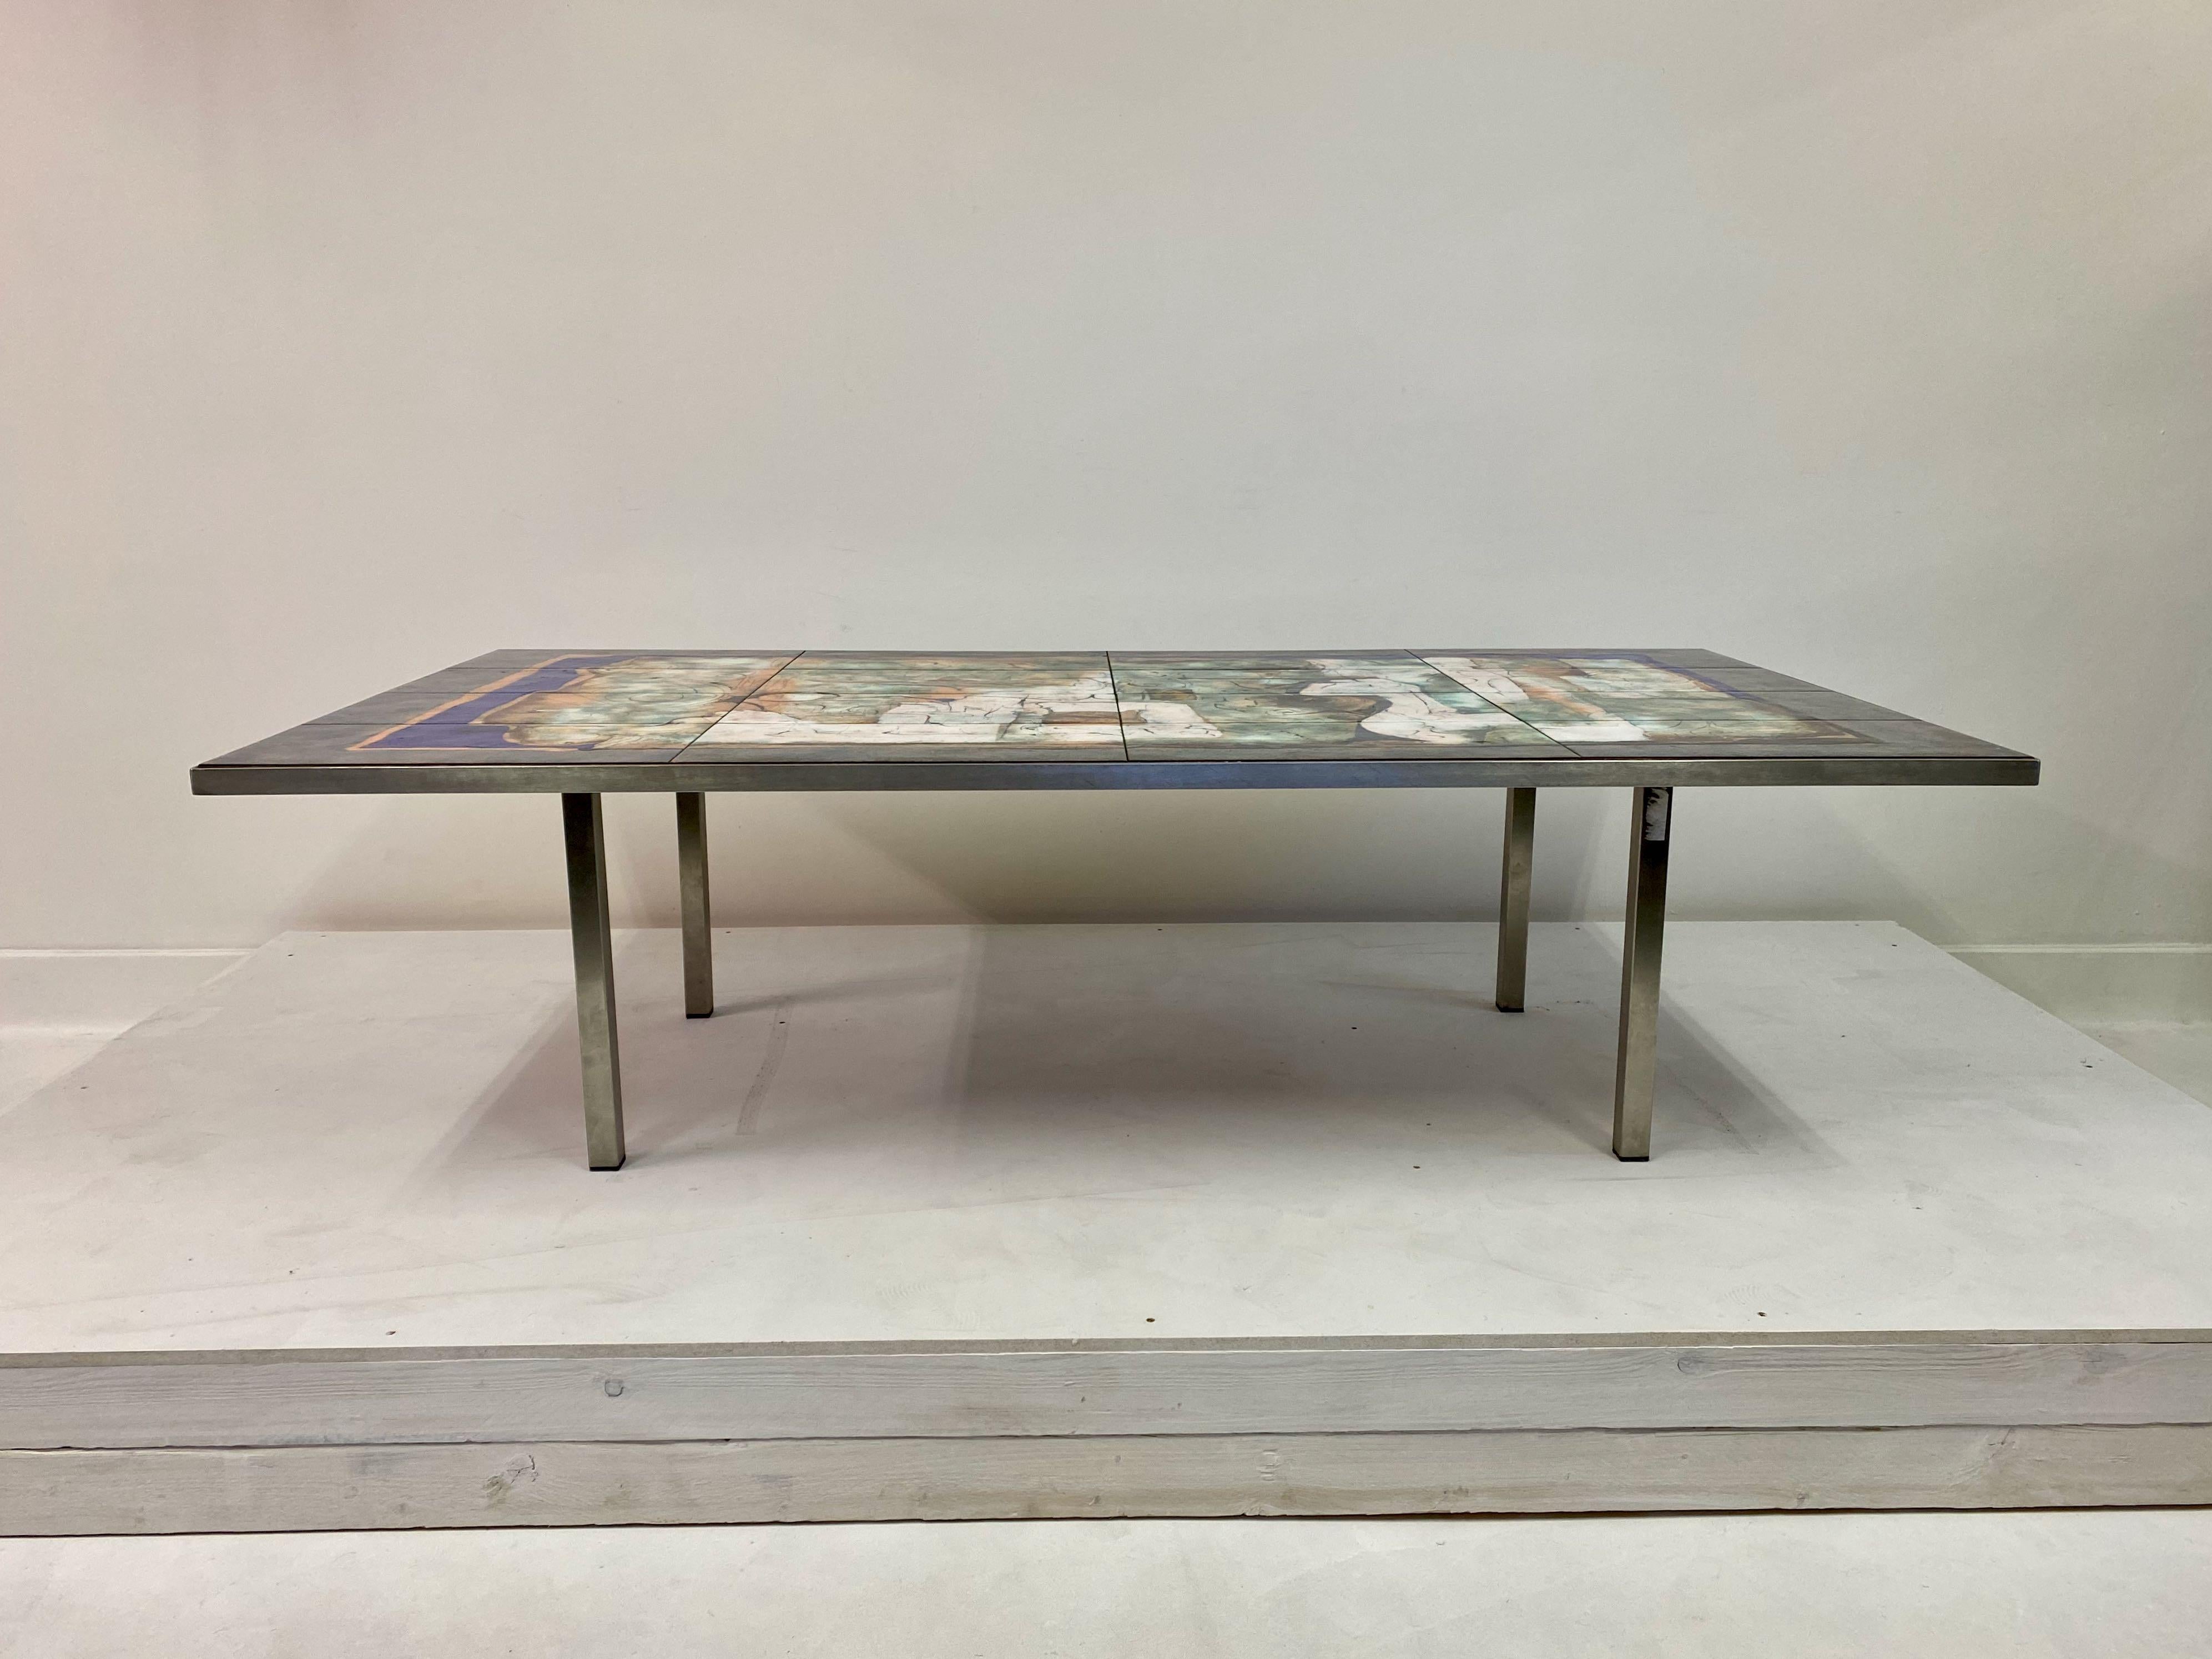 Danish Vintage 1960s Steel Coffee Table with Enameled Top by Giorgio Musoni